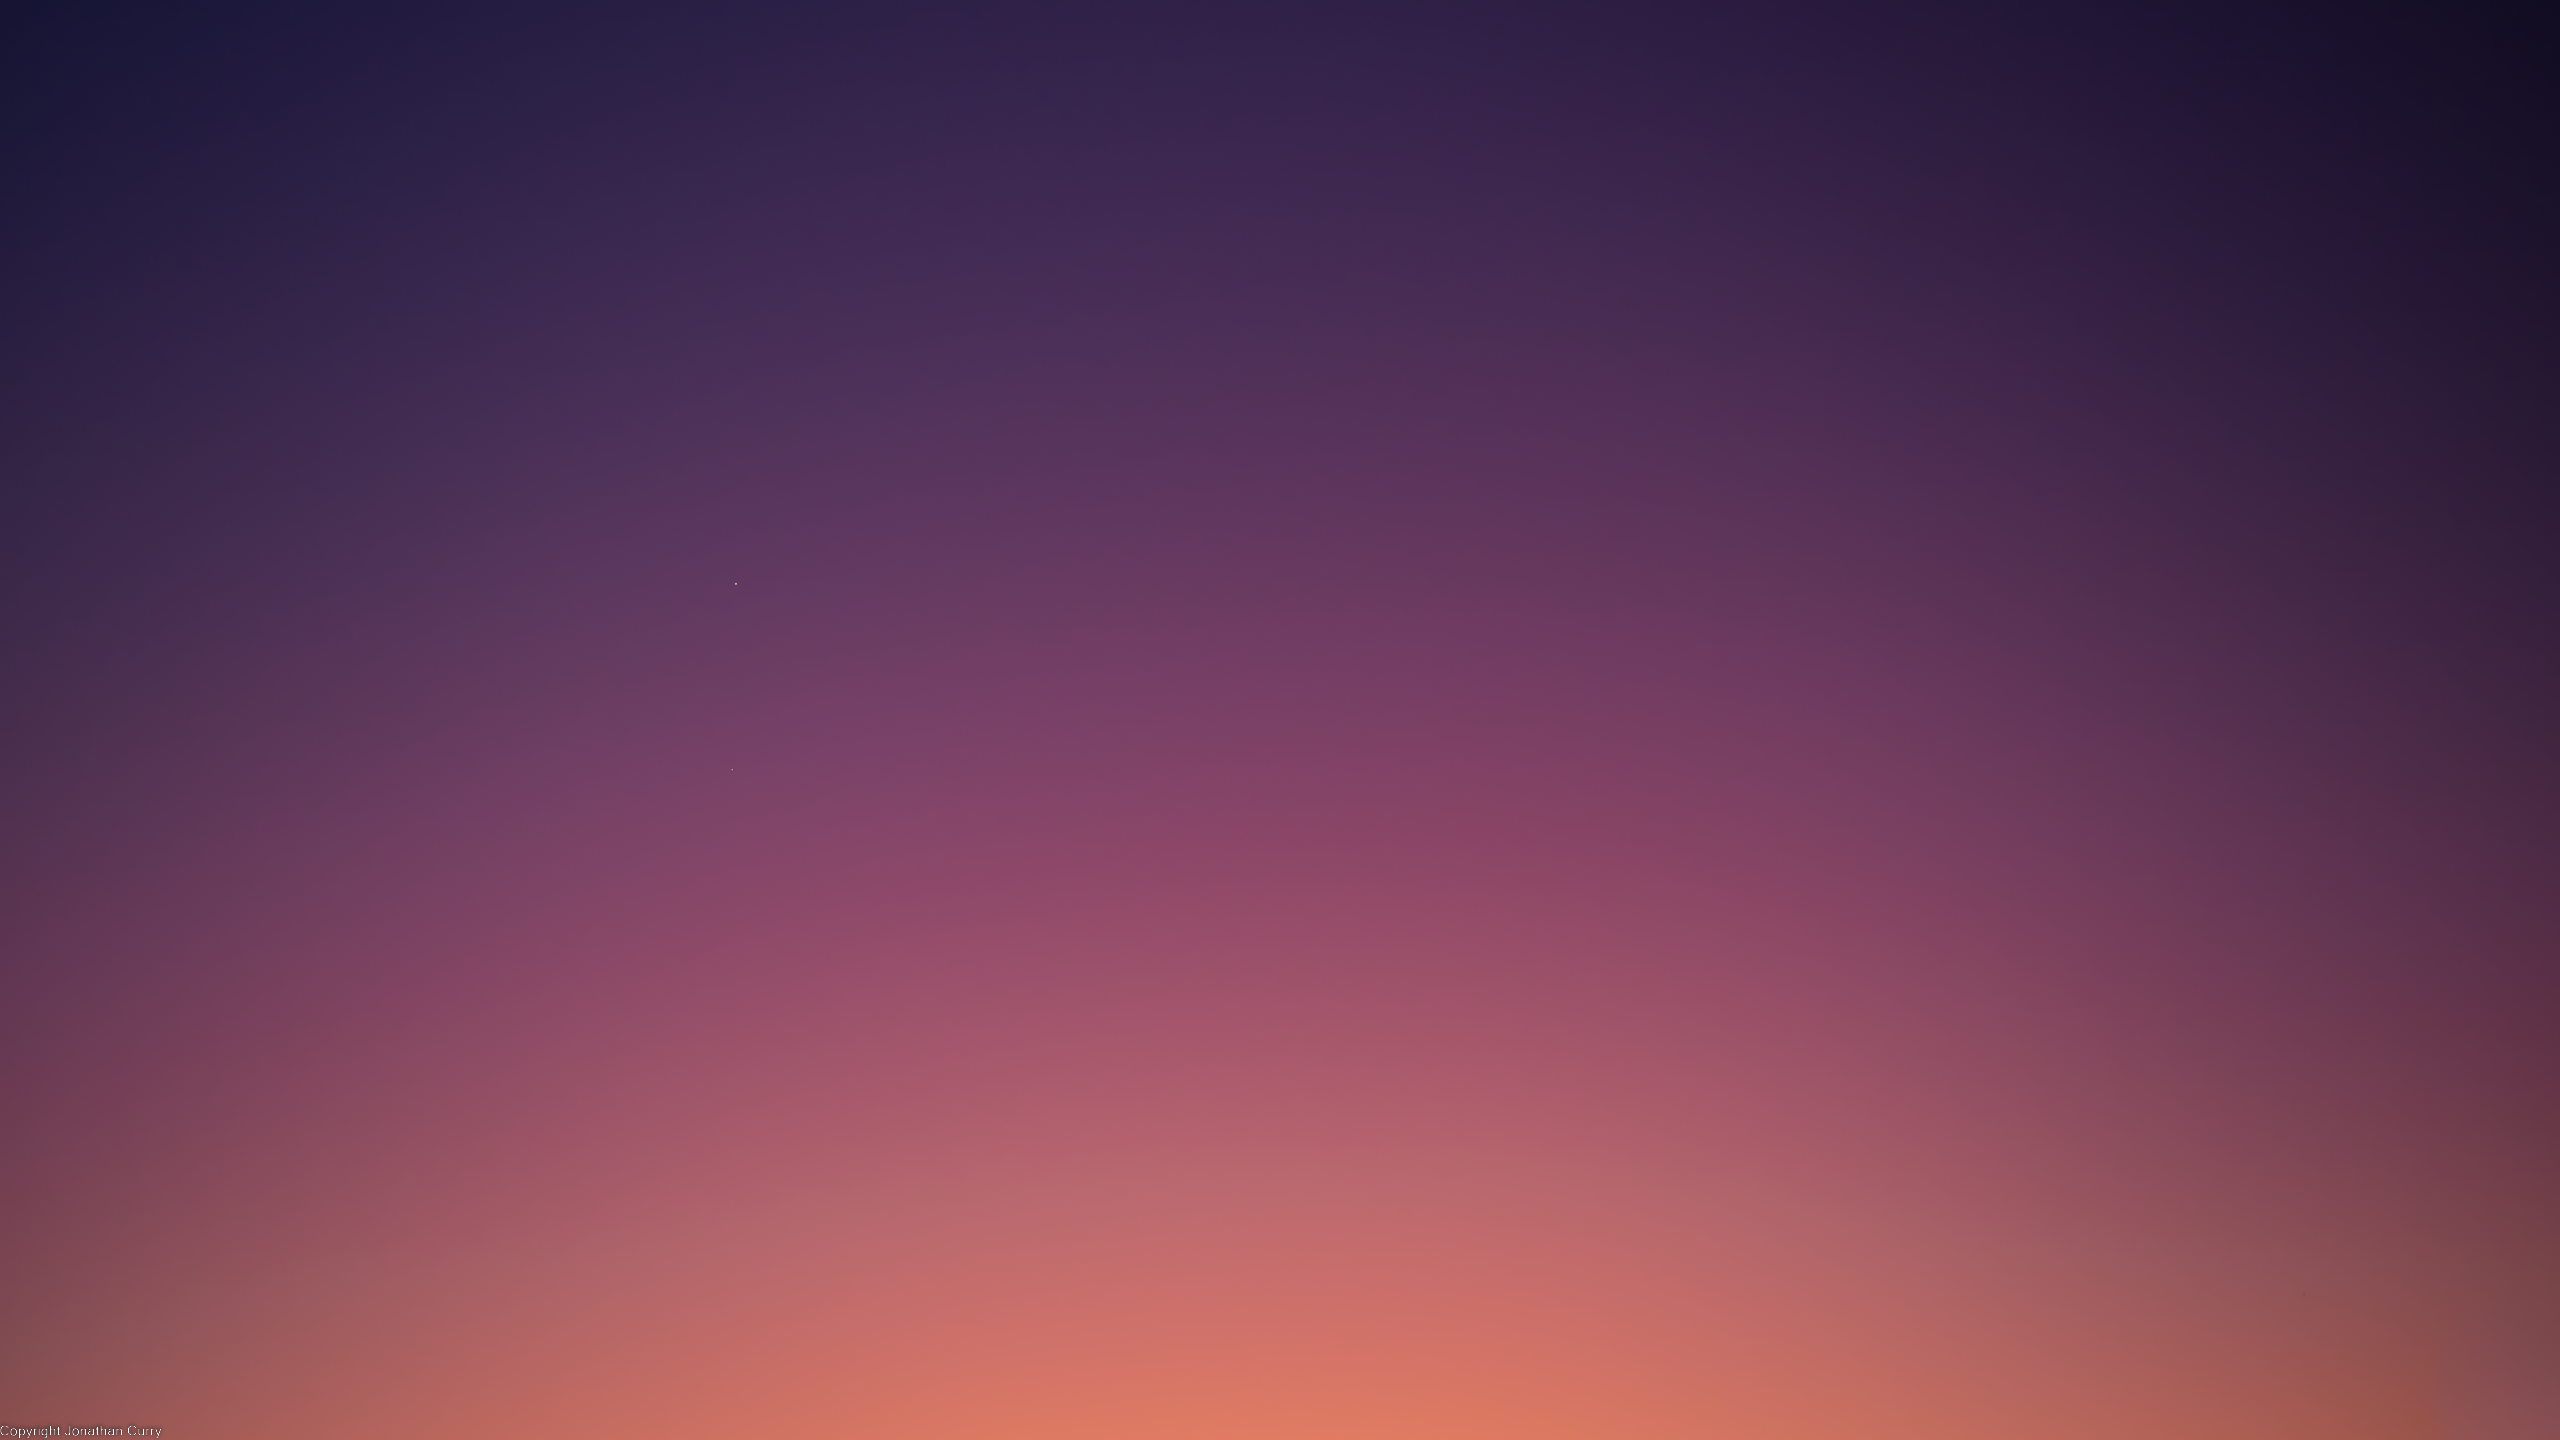 General 2560x1440 sky sunset glow sunset nature warm colors photography outdoors gradient minimalism abstract warm simple background stars